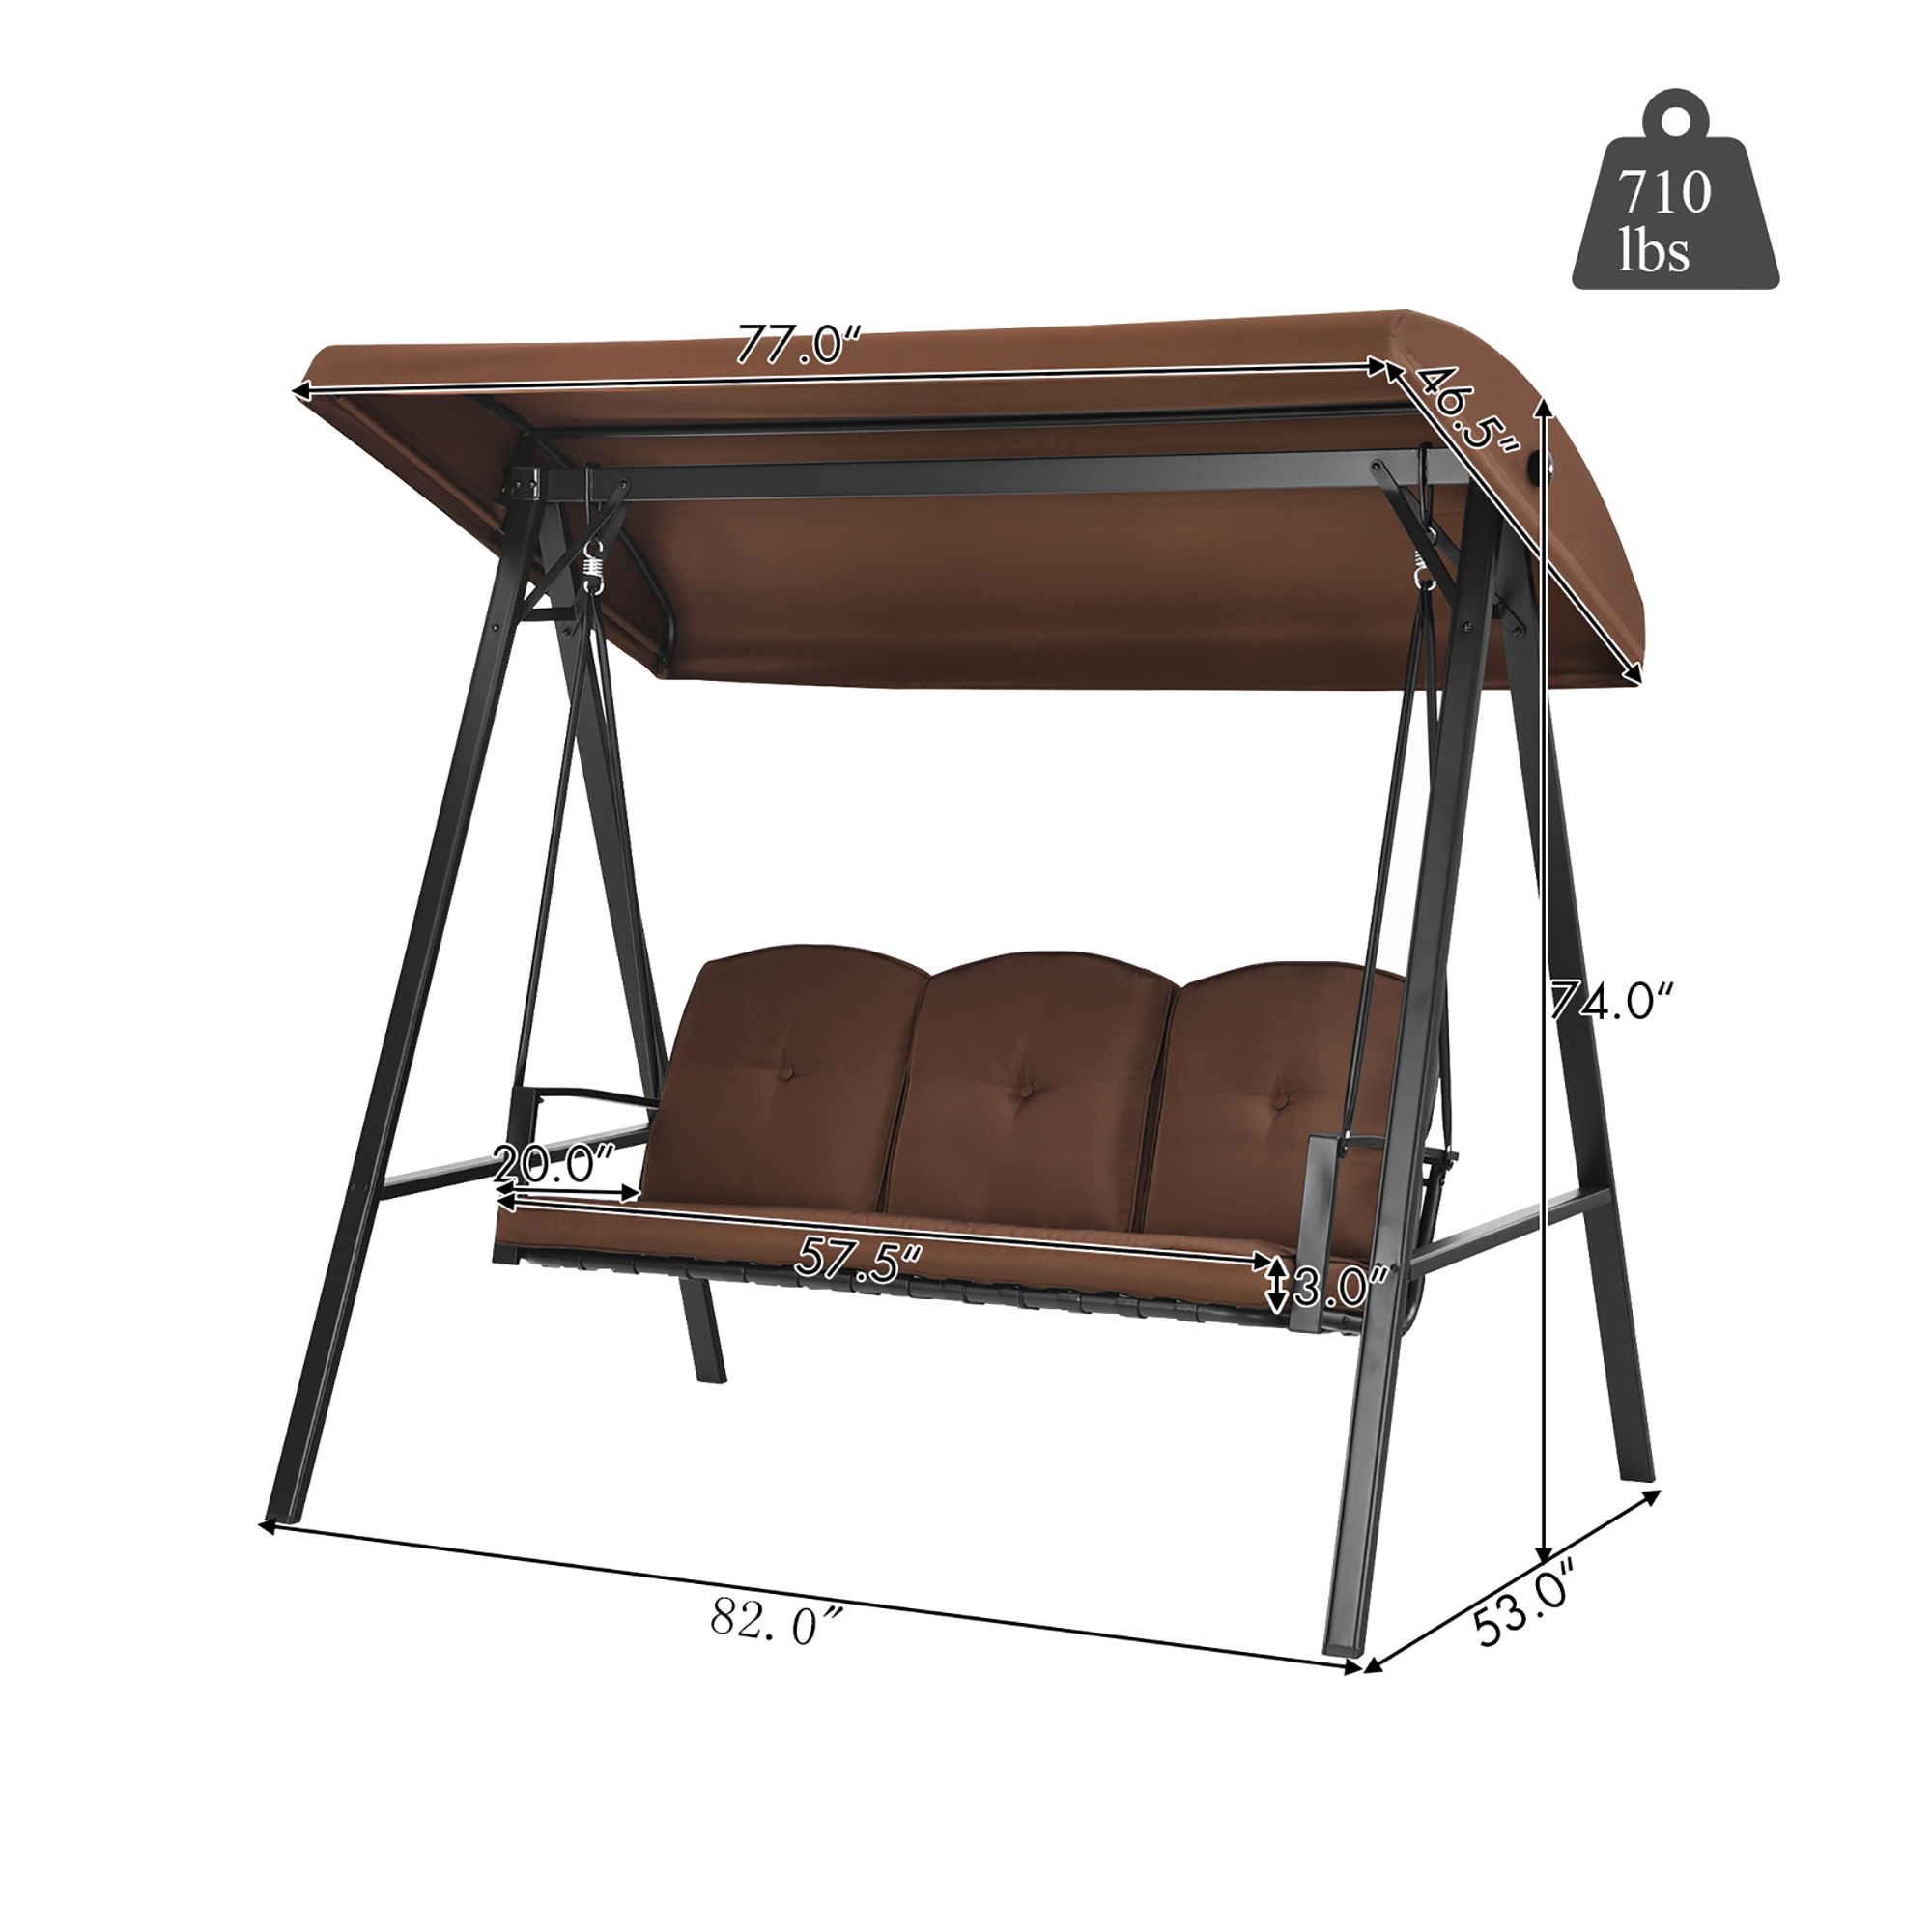 Costway Outdoor 3-Seat Porch Swing with Adjust Canopy and Cushions Brown - image 4 of 10